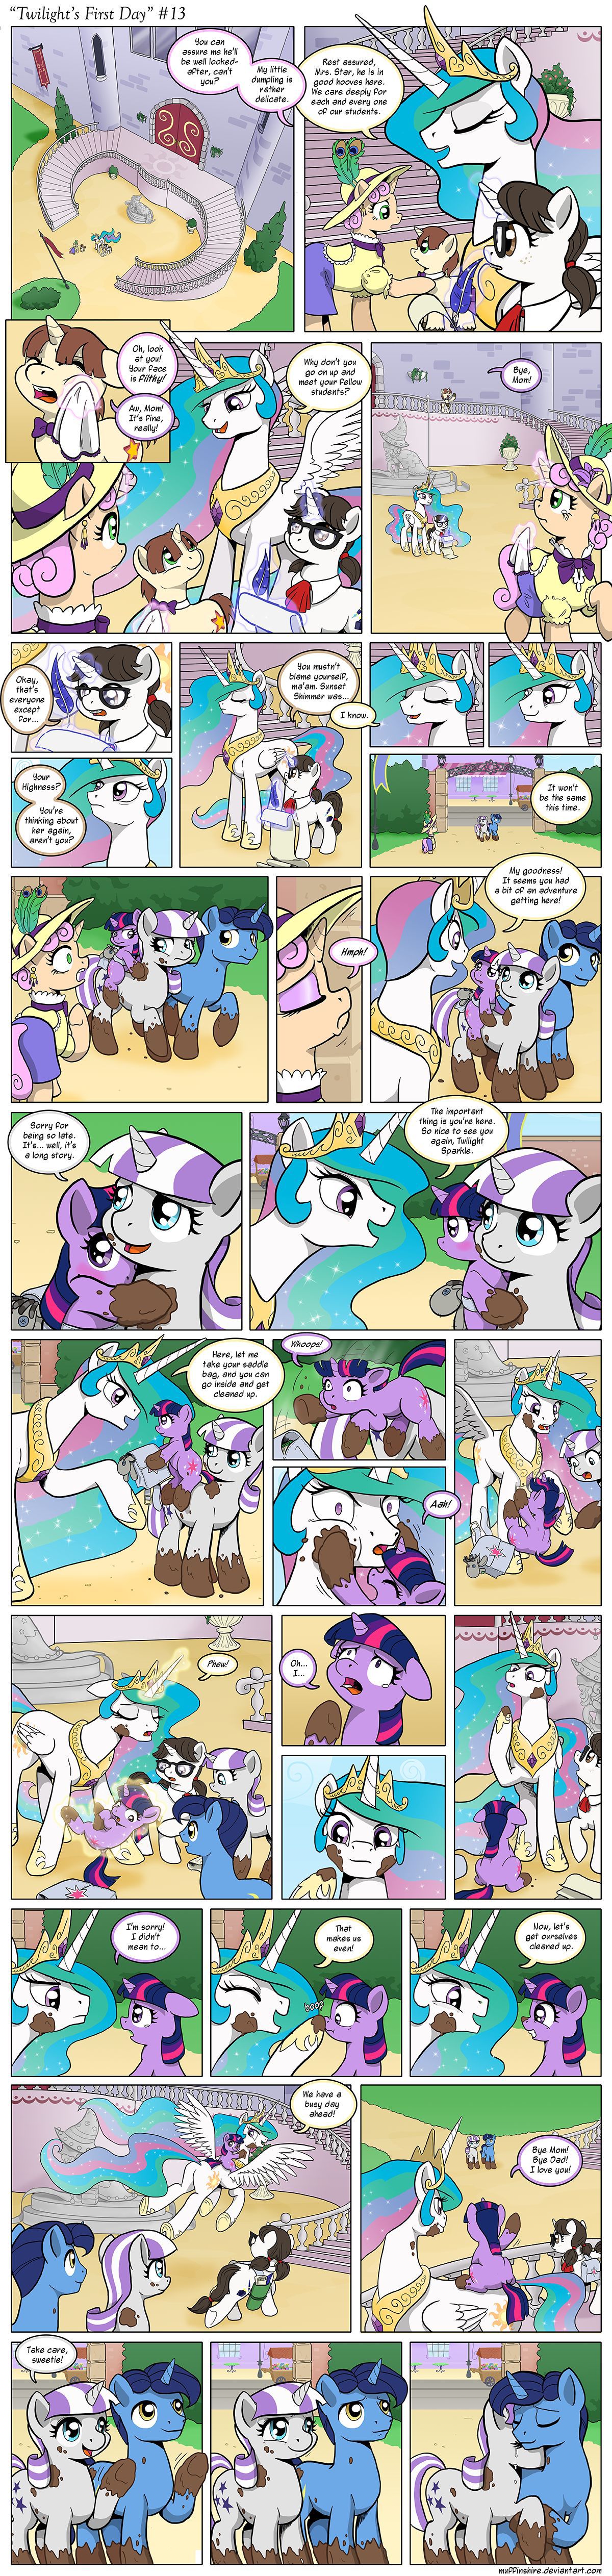 [Muffinshire] Twilight's First Day (My Little Pony: Friendship is Magic) [English] 13